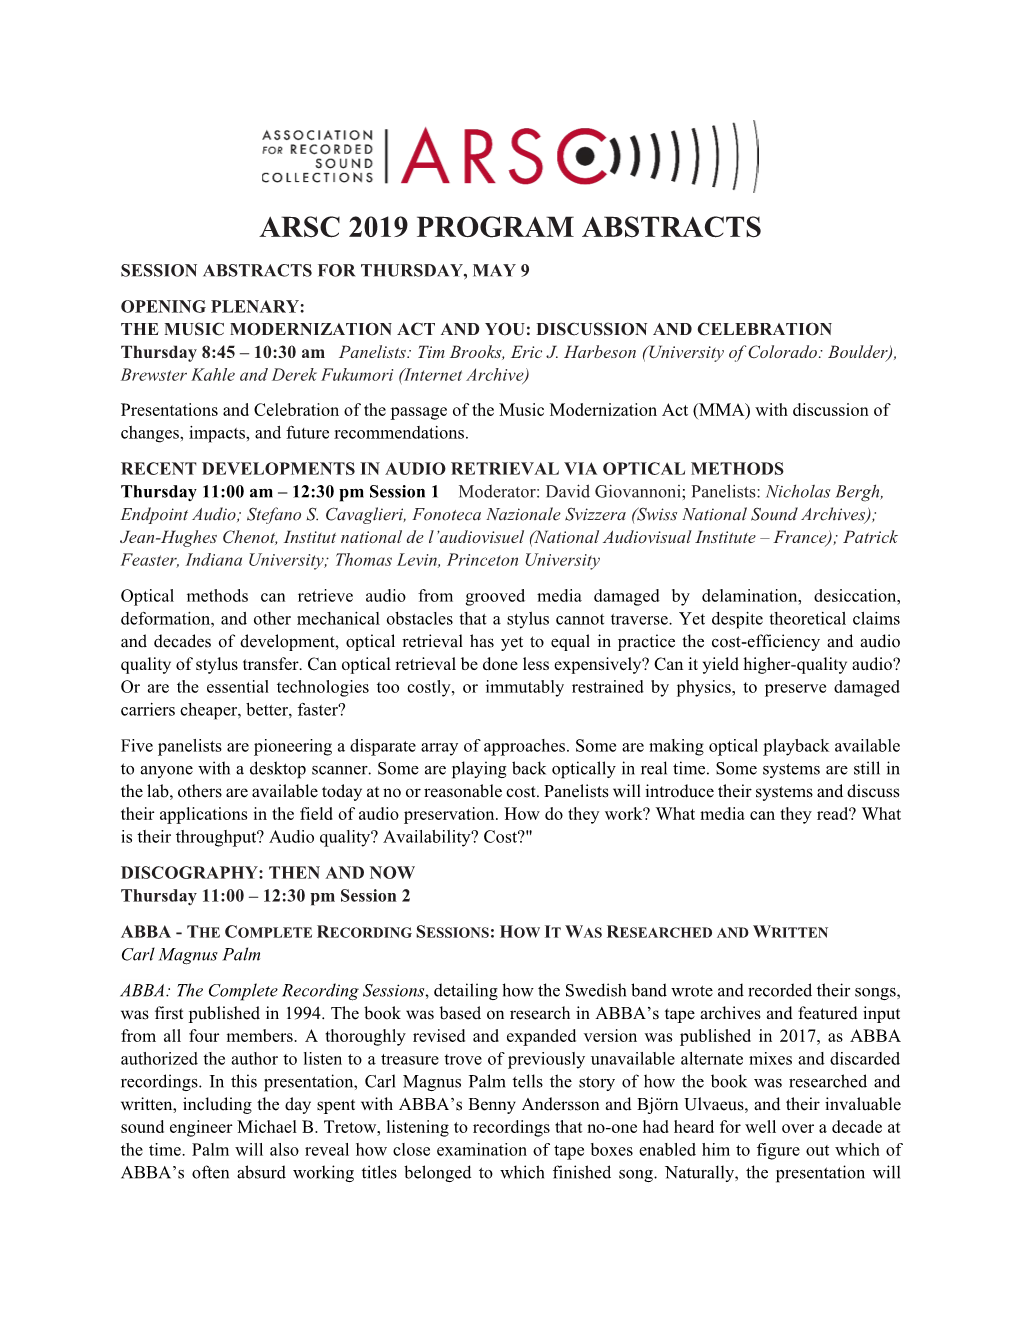 Arsc 2019 Program Abstracts